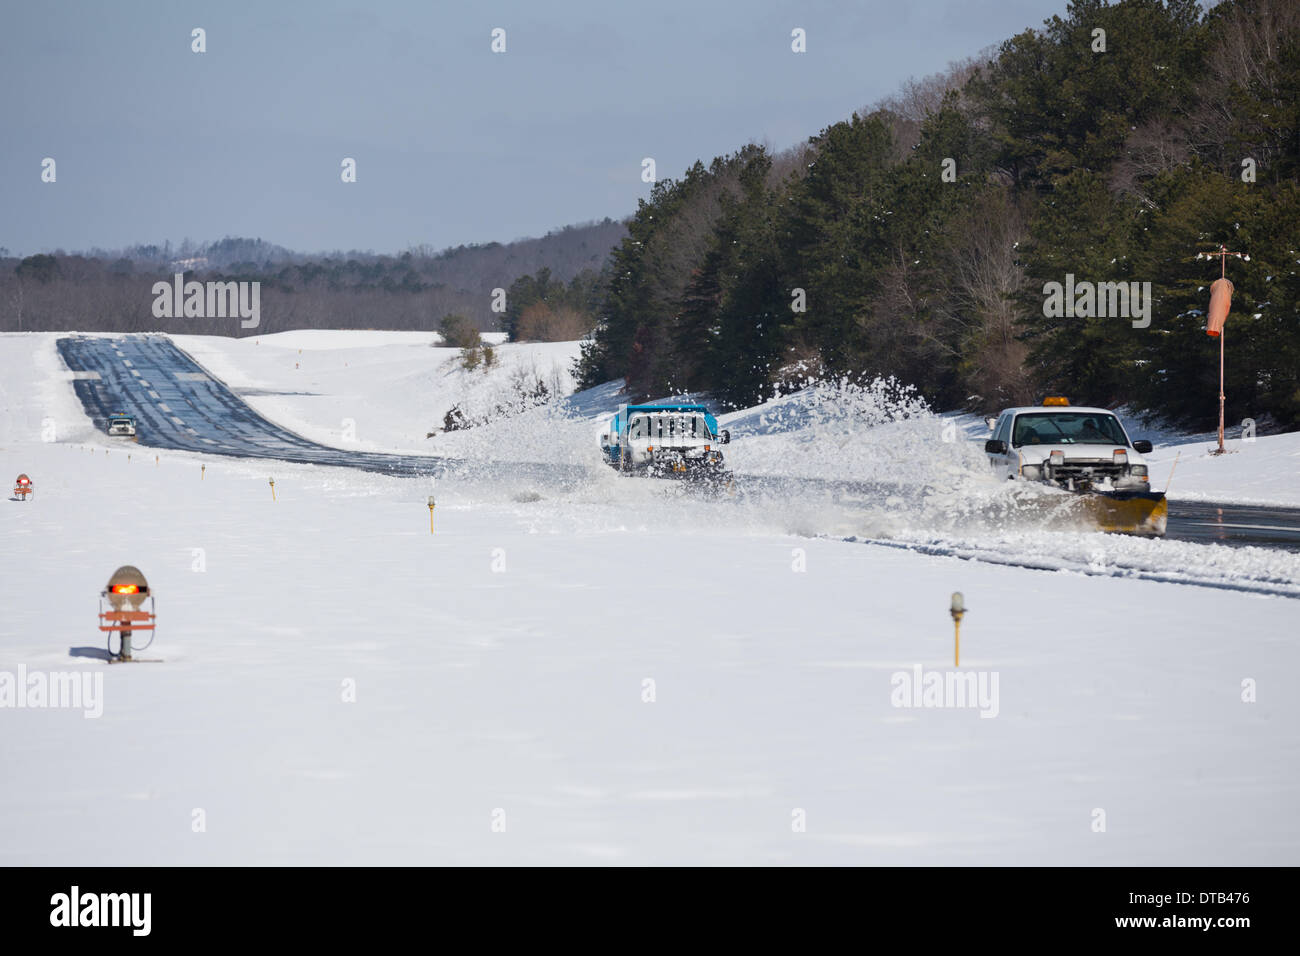 collegedale-tennessee-usa-13th-february-2014-snow-plows-clear-the-DTB476.jpg